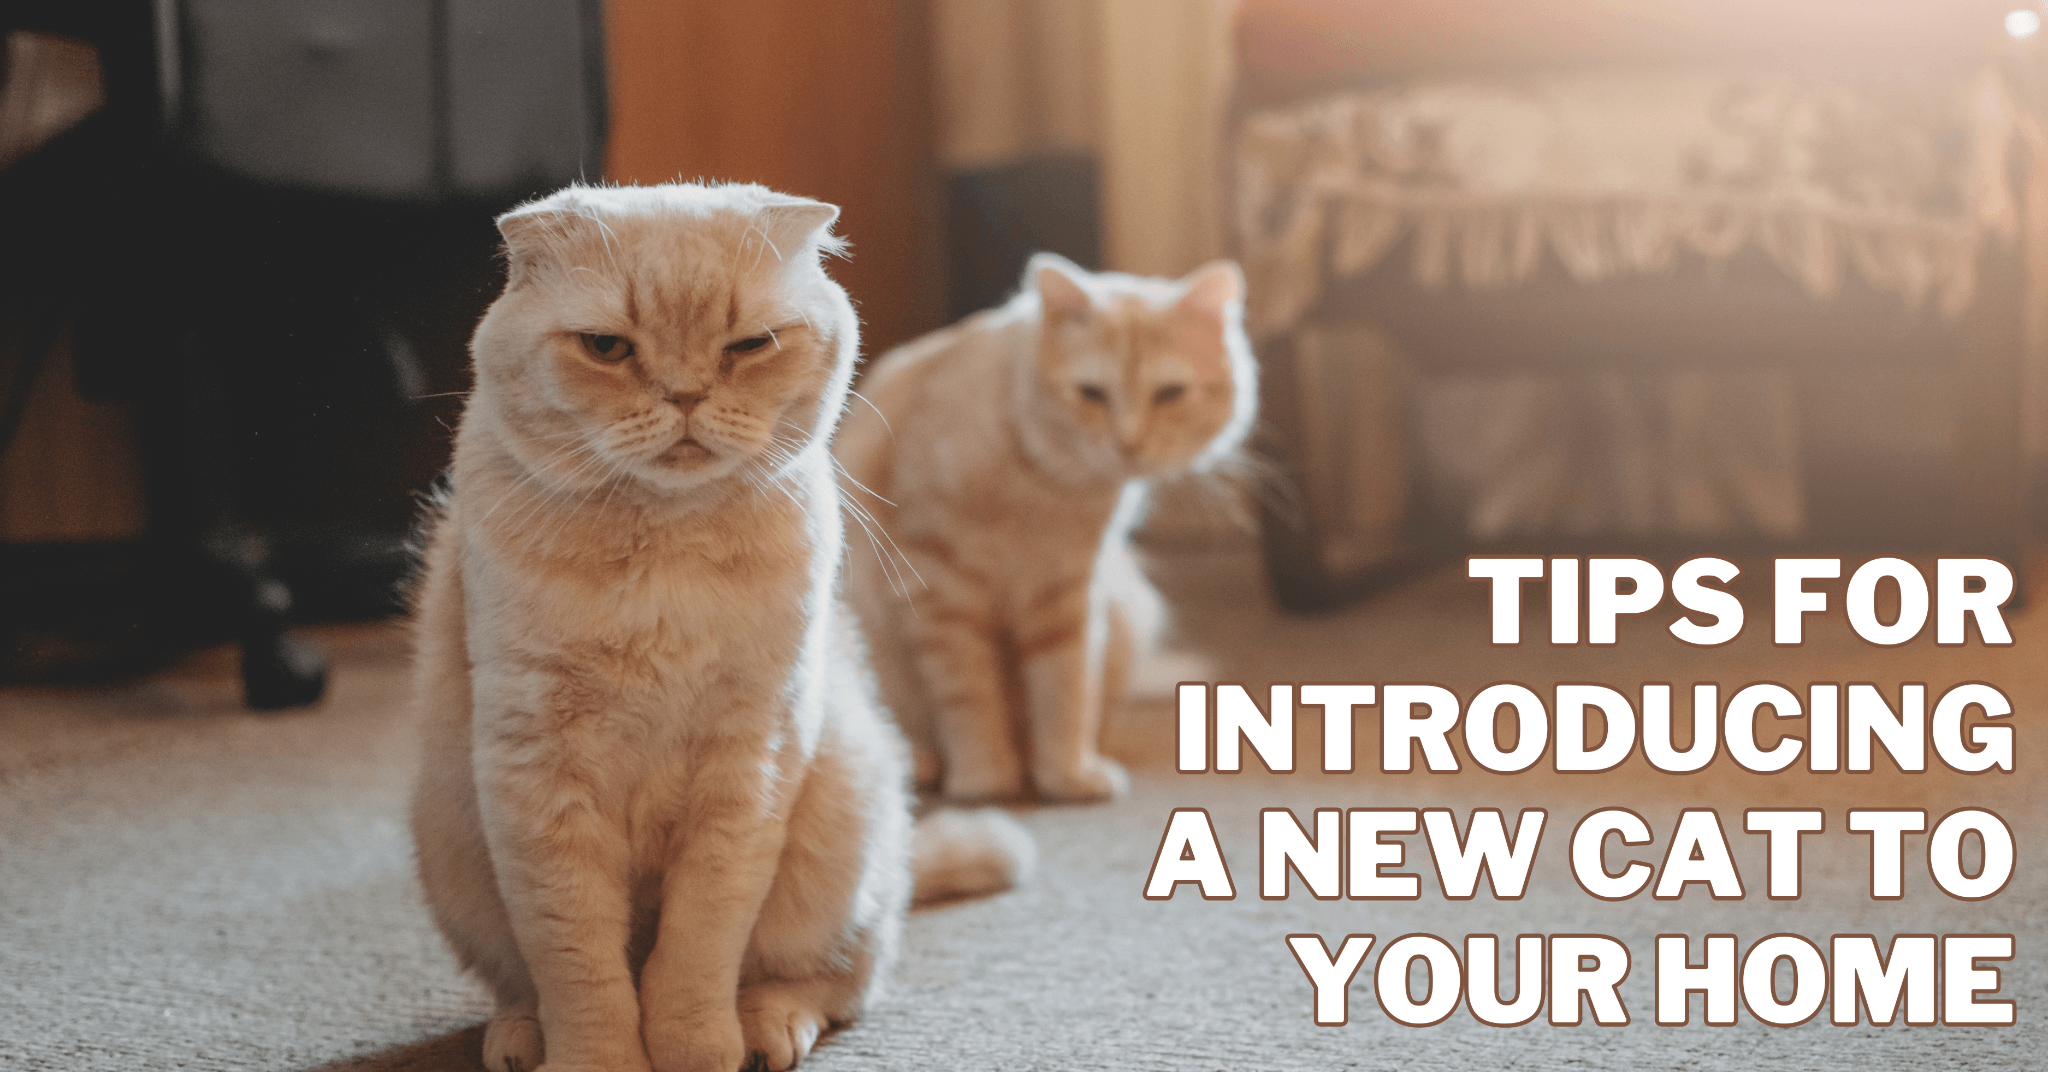 Tips For Introducing A New Cat To Your Home